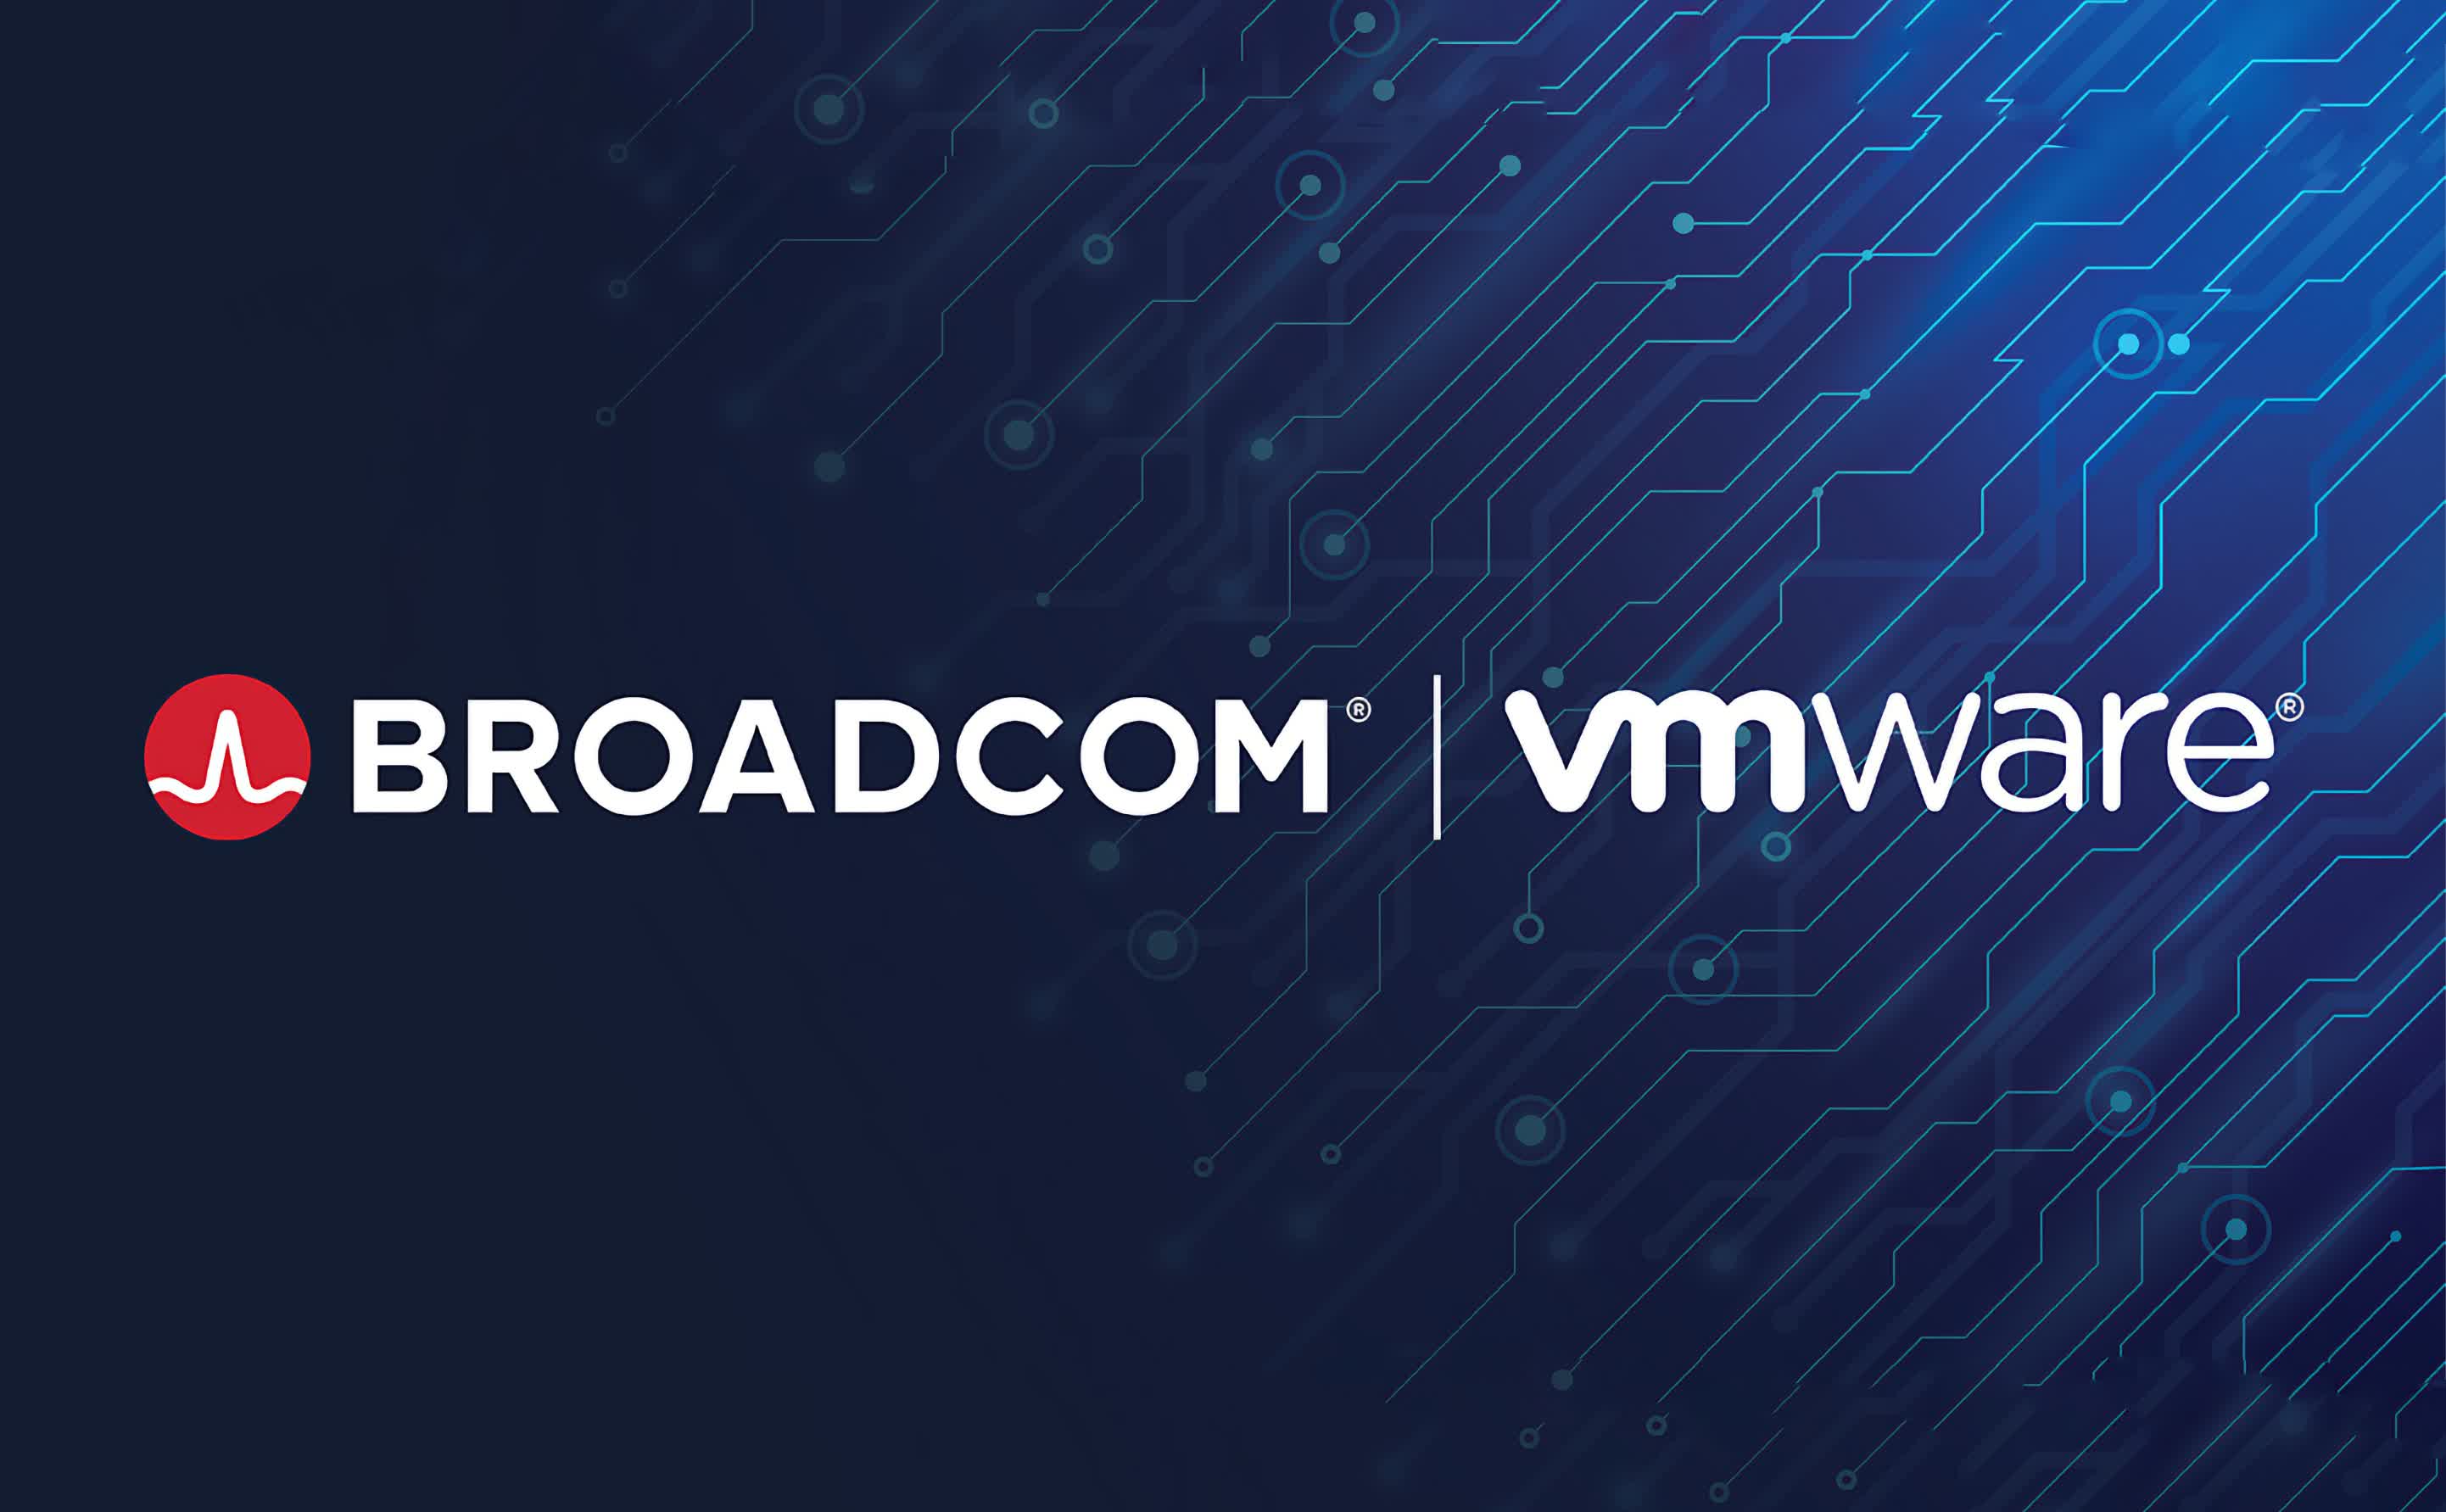 Broadcom's acquisition of VMware leads to massive layoffs, CEO tells remote workers get your butt back in the office